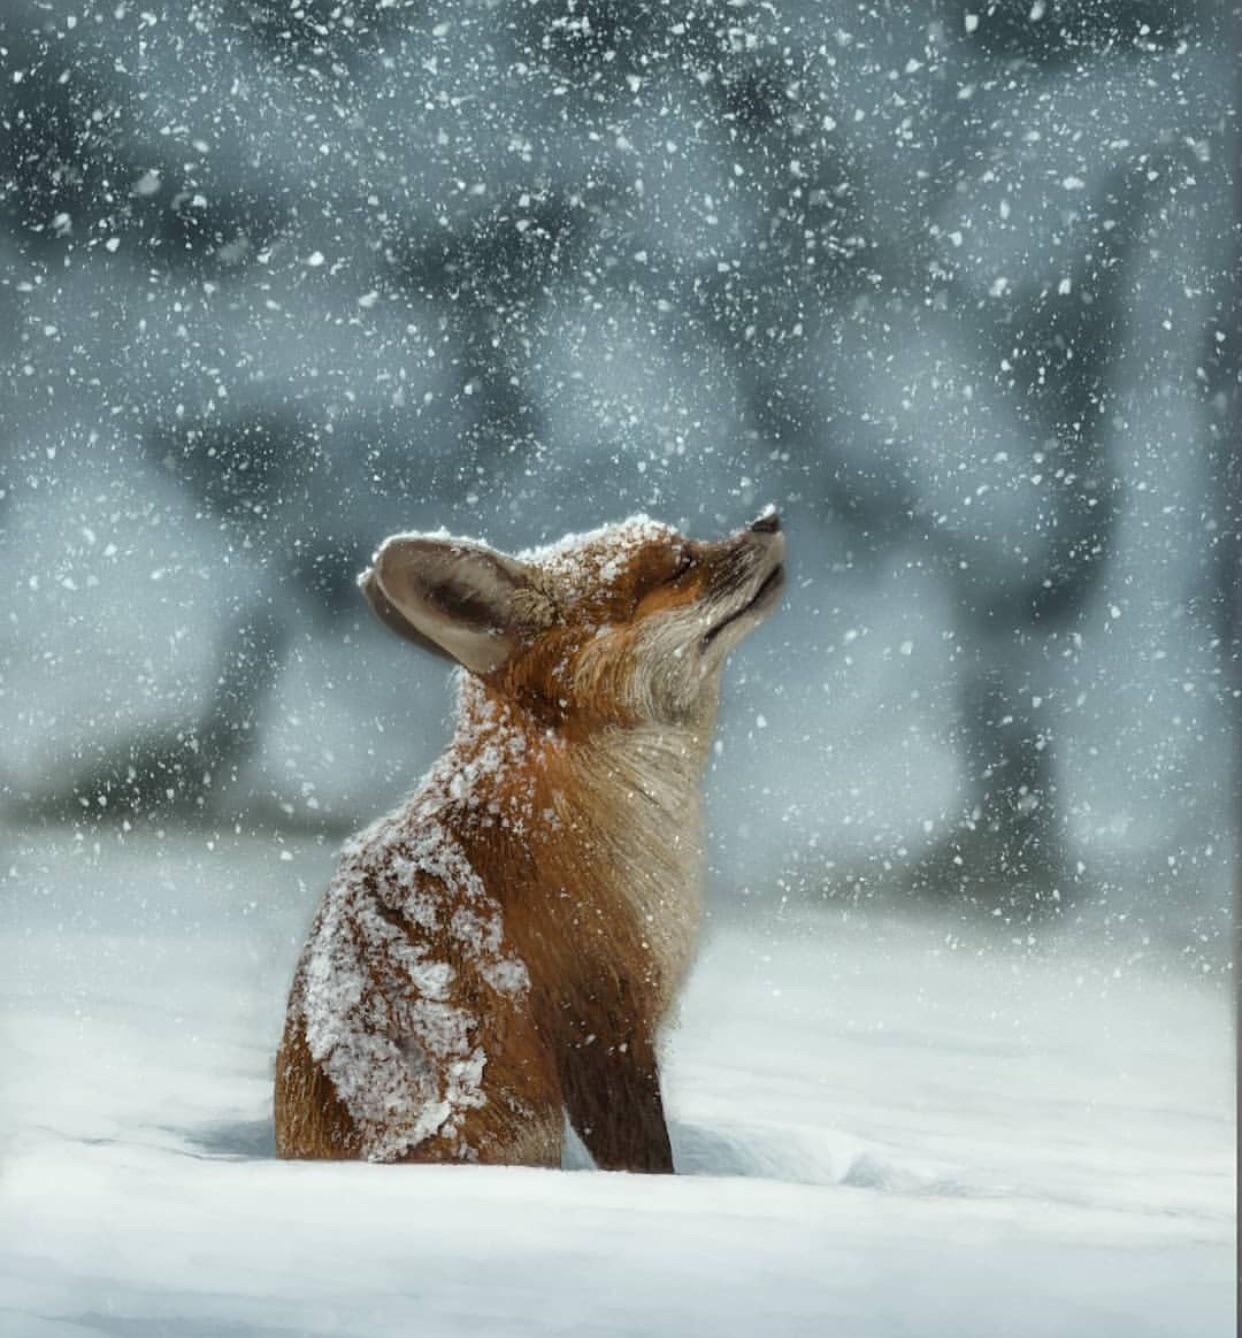 Foxes meditate regularly.